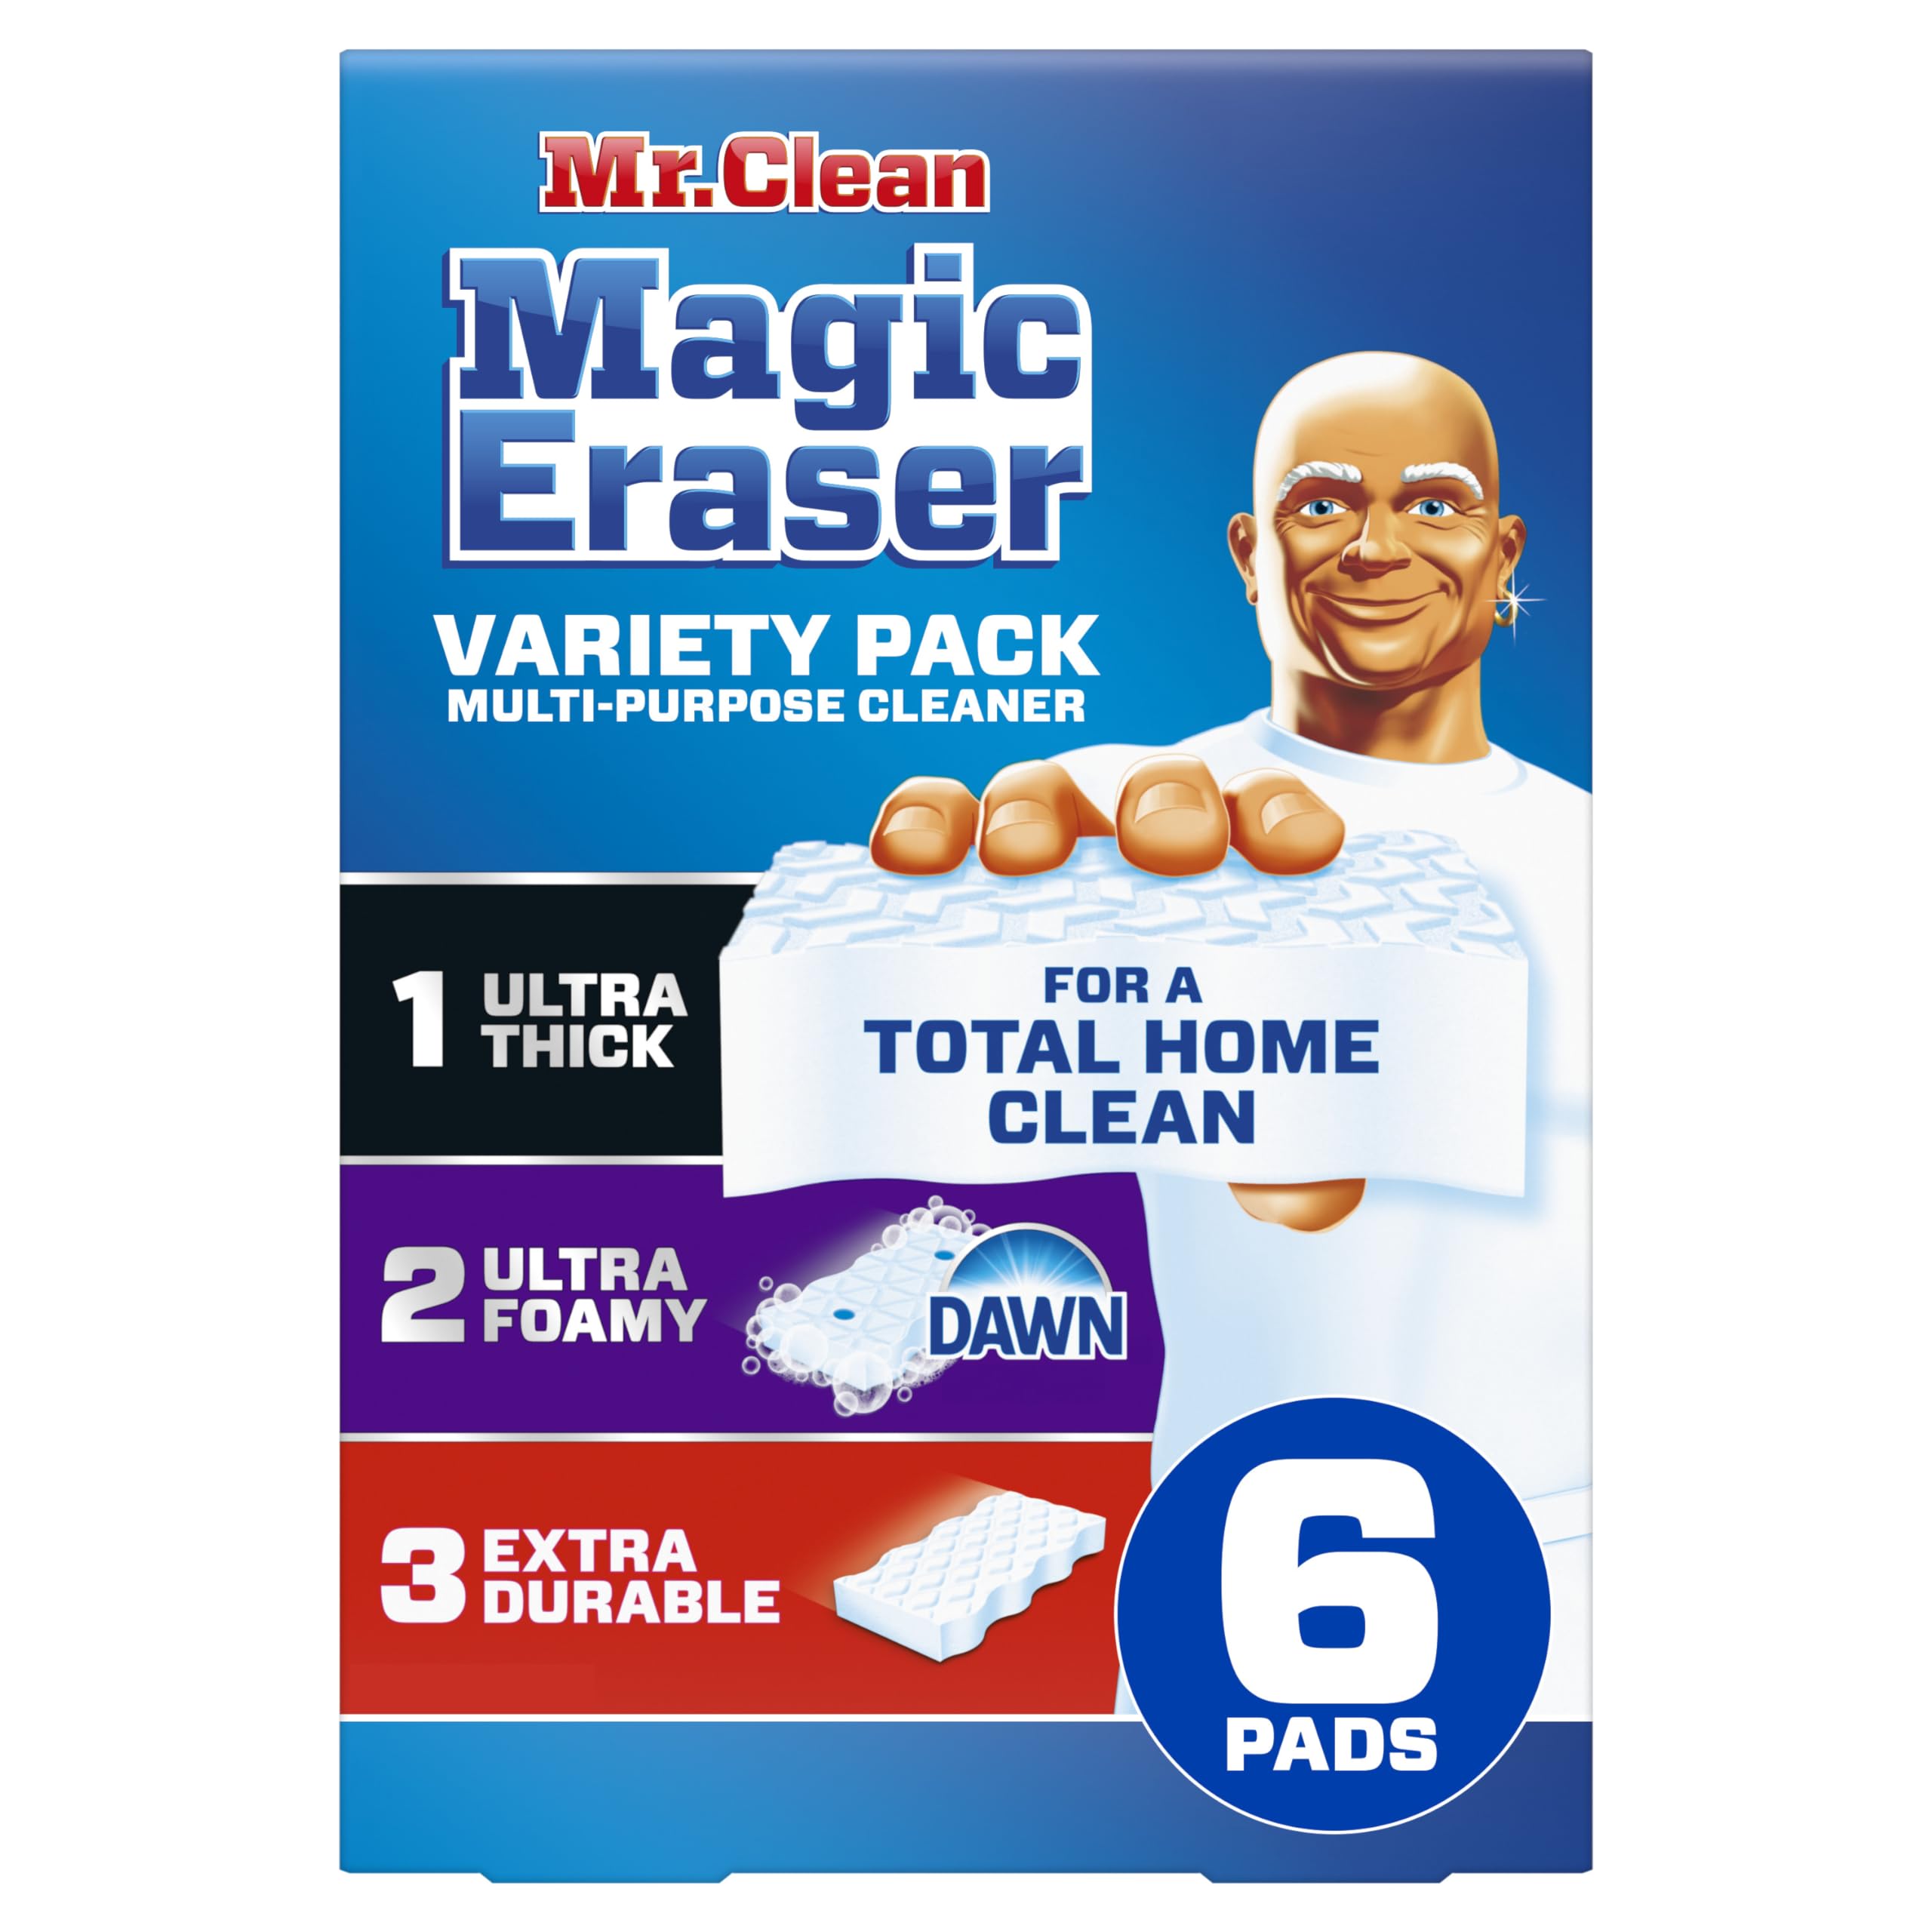 Mr. Clean Magic Eraser Variety Pack with Ultra Thick, Ultra Foamy, and Extra Durable Multi Purpose Cleaners, 6ct